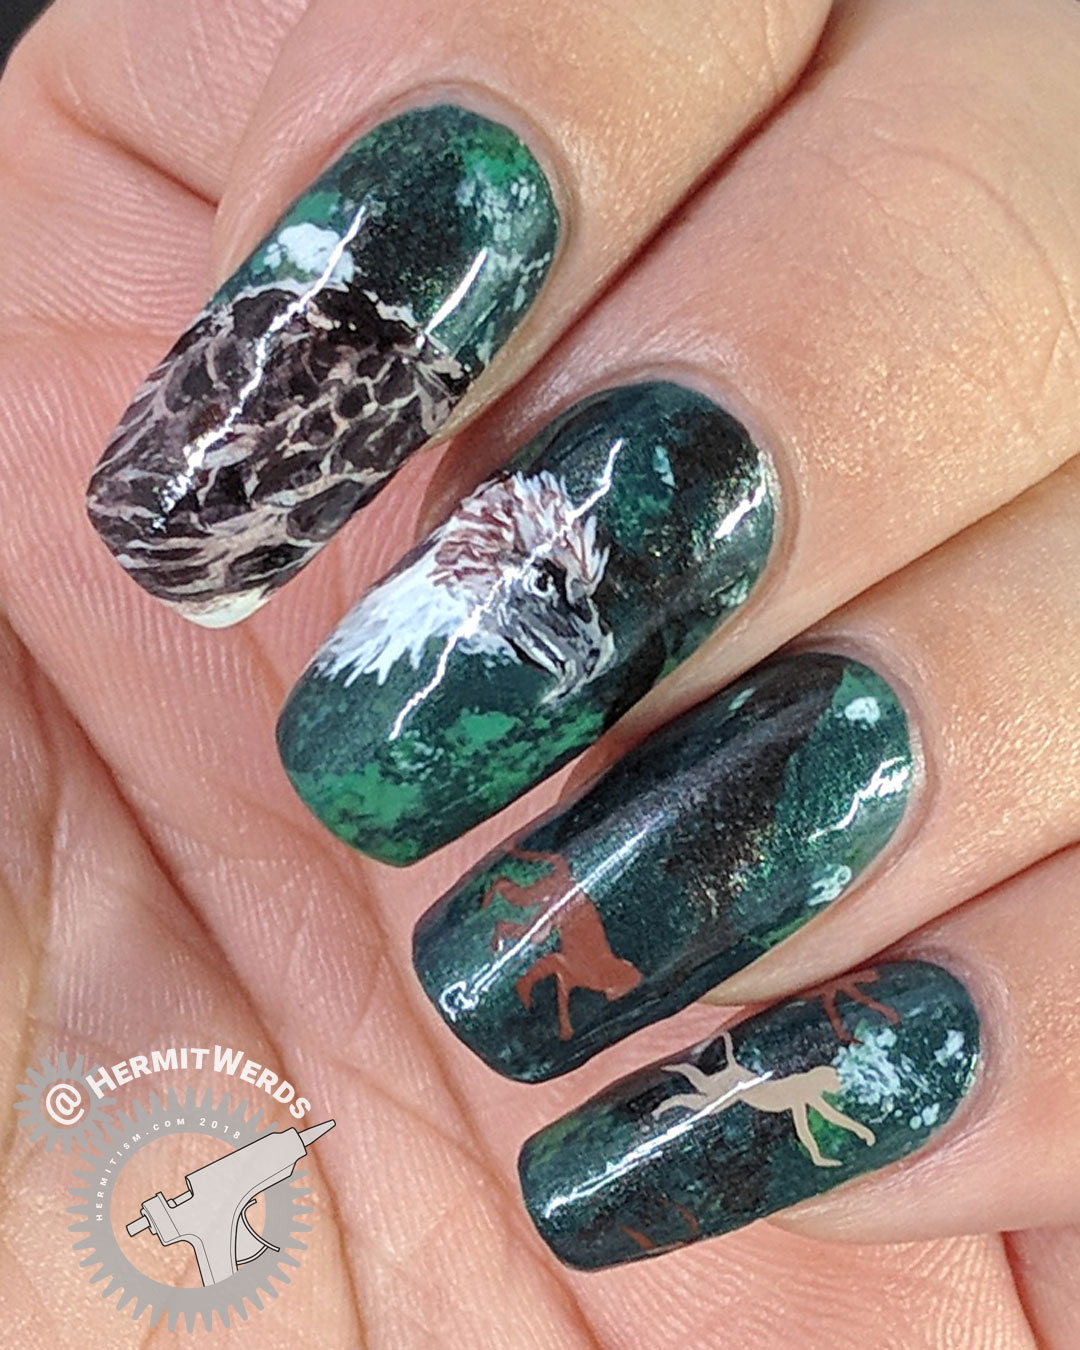 Philippine Monkey-eating Eagle (glossy) - Hermit Werds - freehand nail art of a Philippine Monkey-eating Eagle on a dark green background with fleeing monkey silhouettes